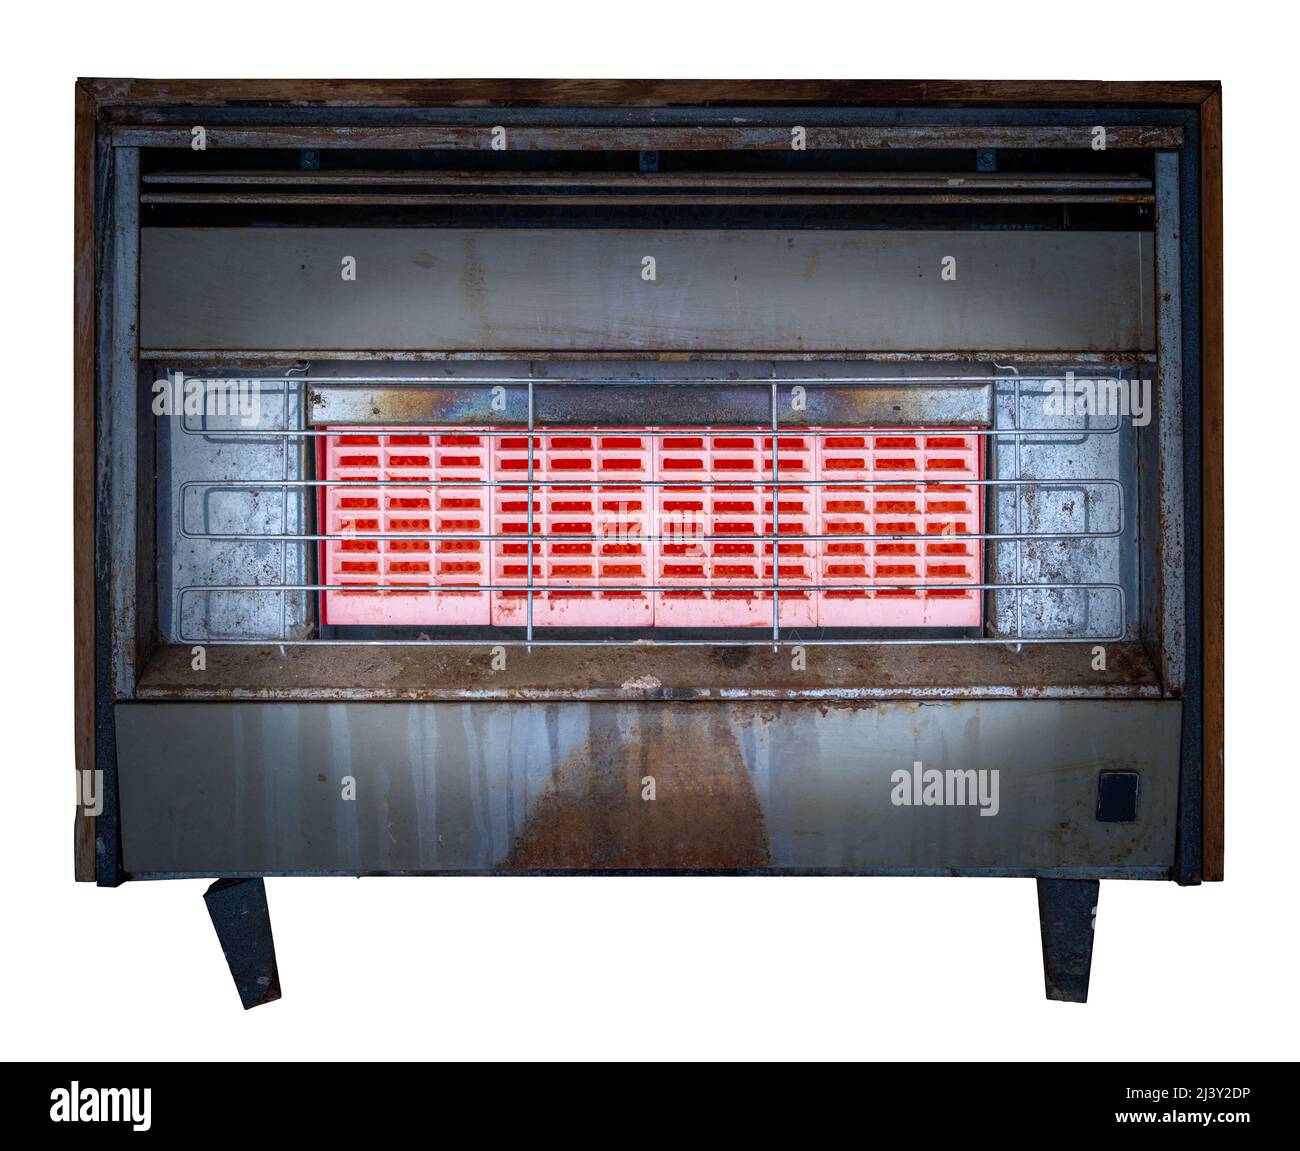 Isolated Grungy Glowing Old Interior Gas Fire Or Radiator Or Heater While On Stock Photo